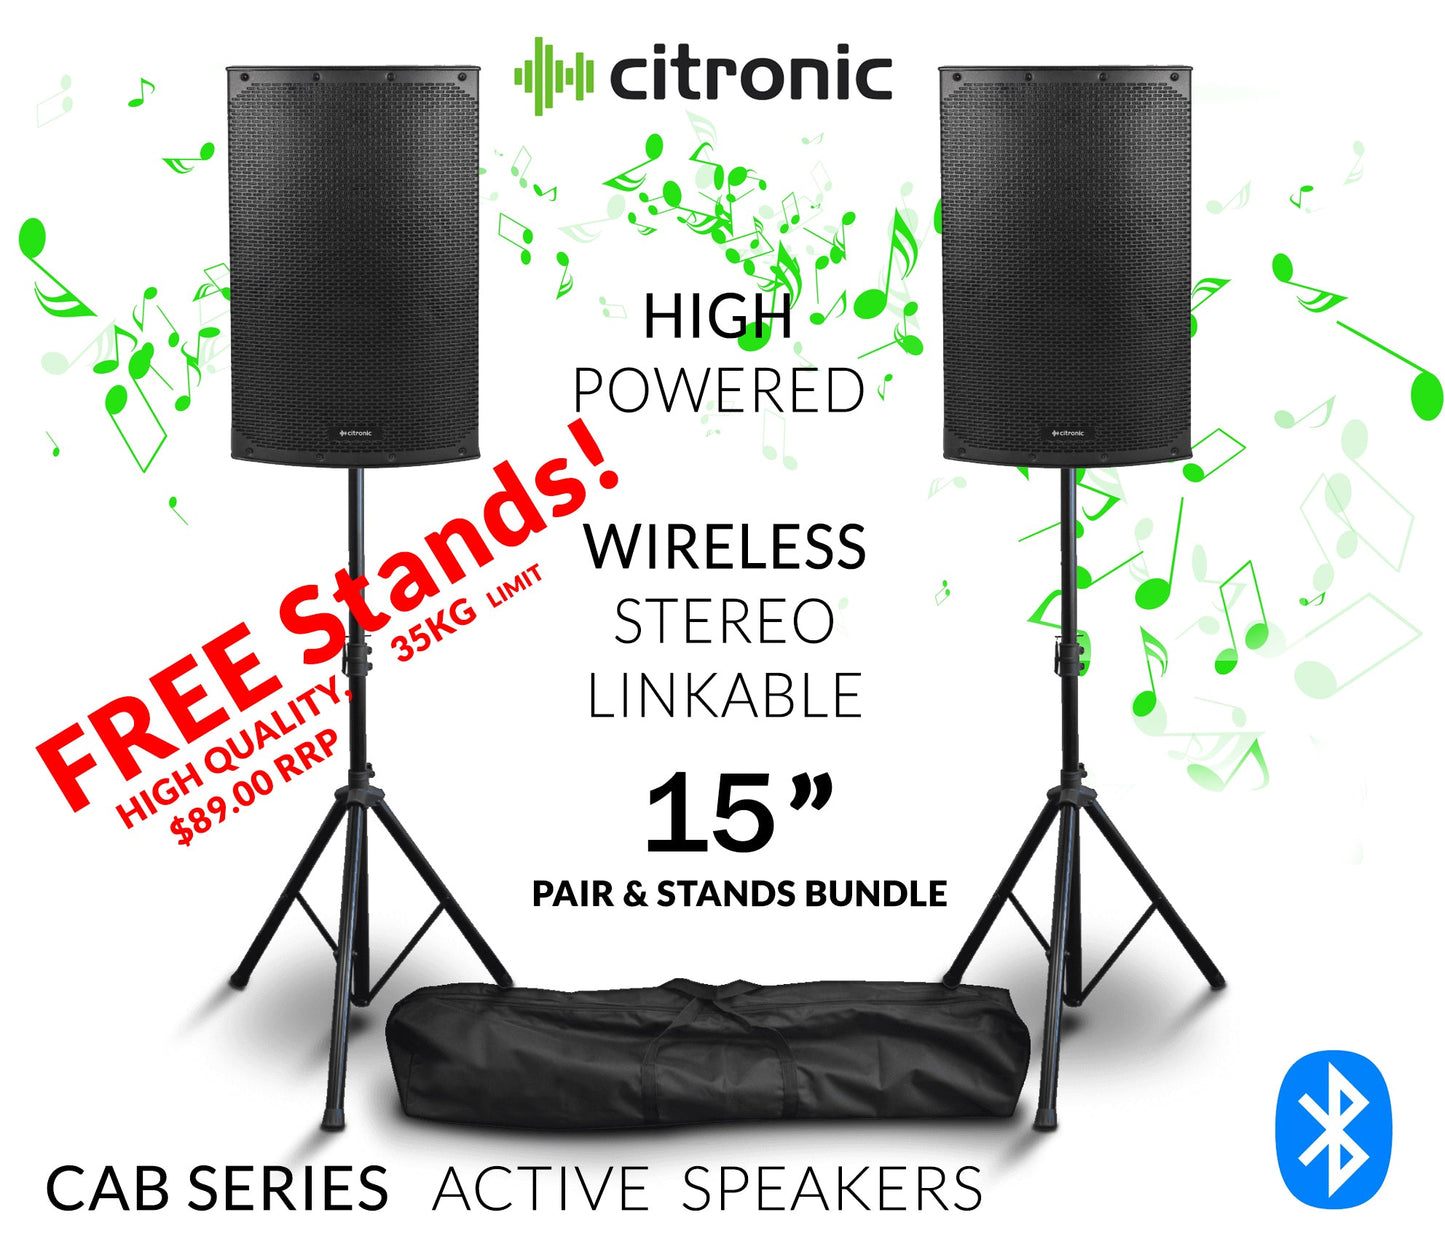 Citronic 15 inch Bluetooth Stereo Linkable PA Powerful Loud Active Digital Amp Mixer Speakers with Stands